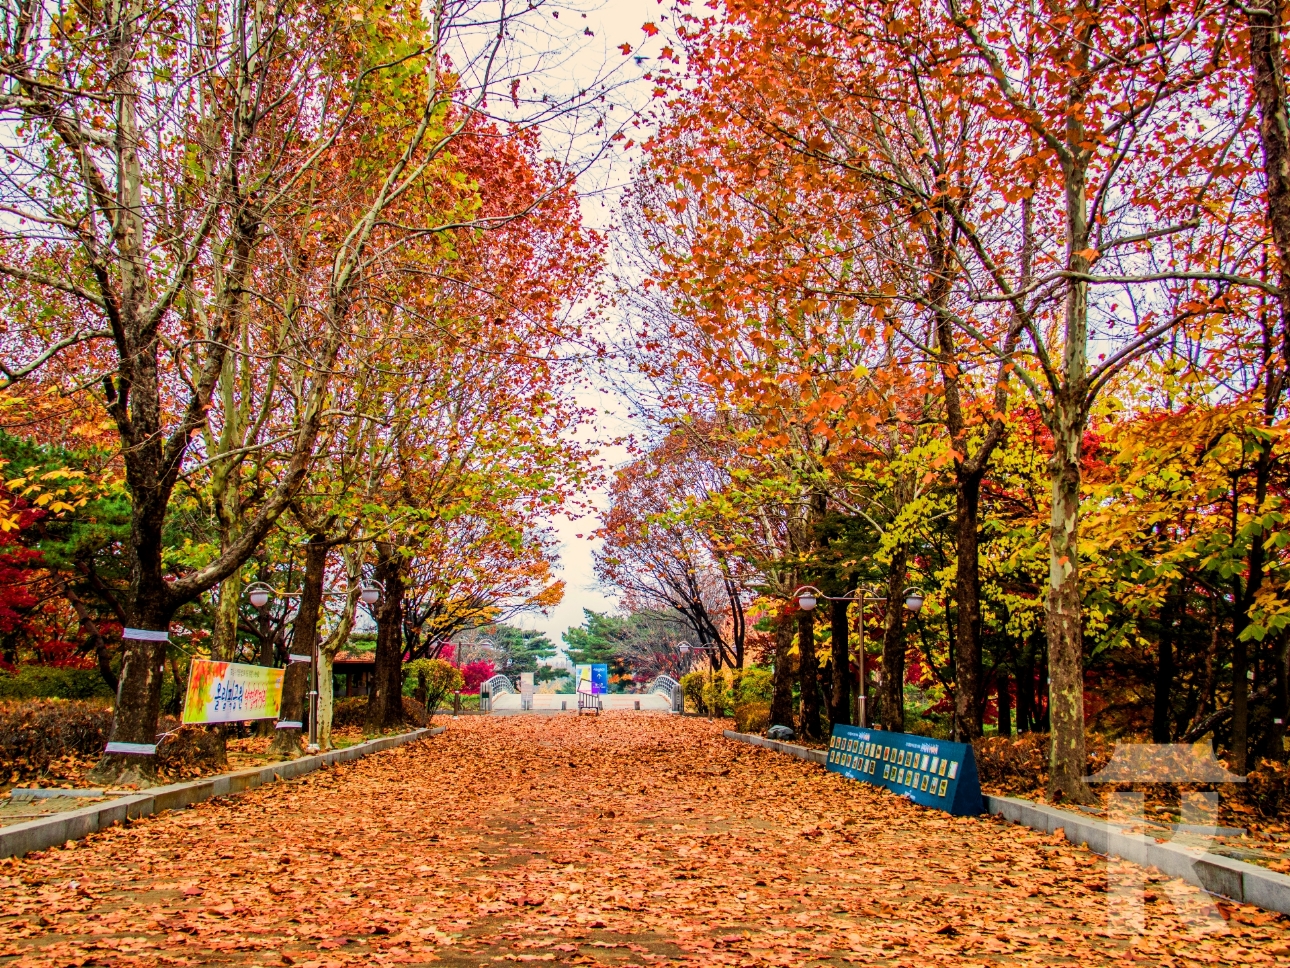 Top Places To See Autumn Leaves and Fall Foliage in Korea